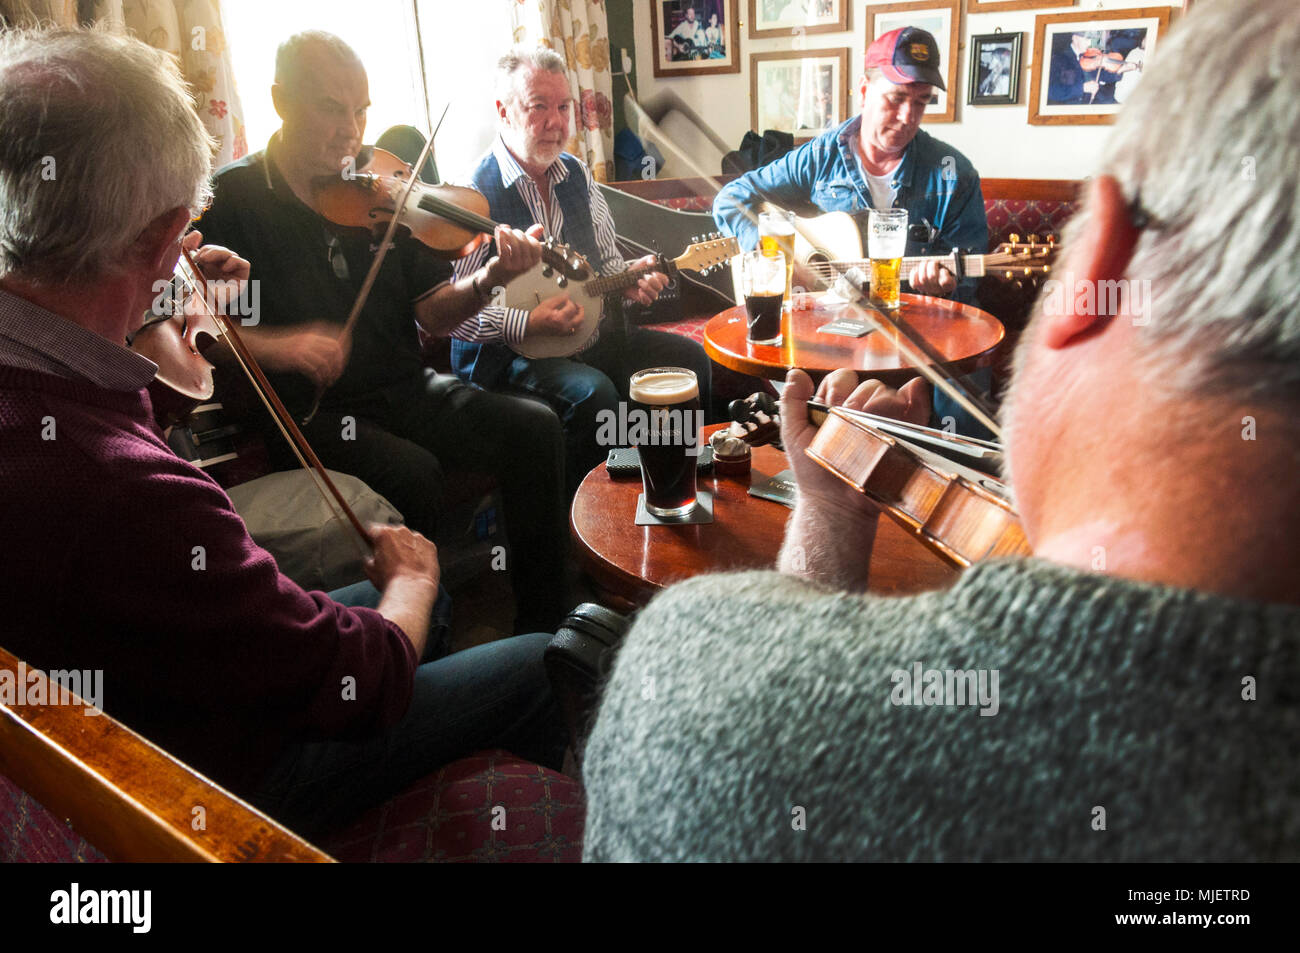 Ardara, County Donegal, Ireland. 5th May 2018. Traditional musicians from Ireland, Scotland, Wales and France gather for the 18th “Cup of Tae” music festival held in this west coast town. The name “Cup of Tae” comes from a traditional Irish dance tune.  Credit: Richard Wayman/Alamy Live News Stock Photo